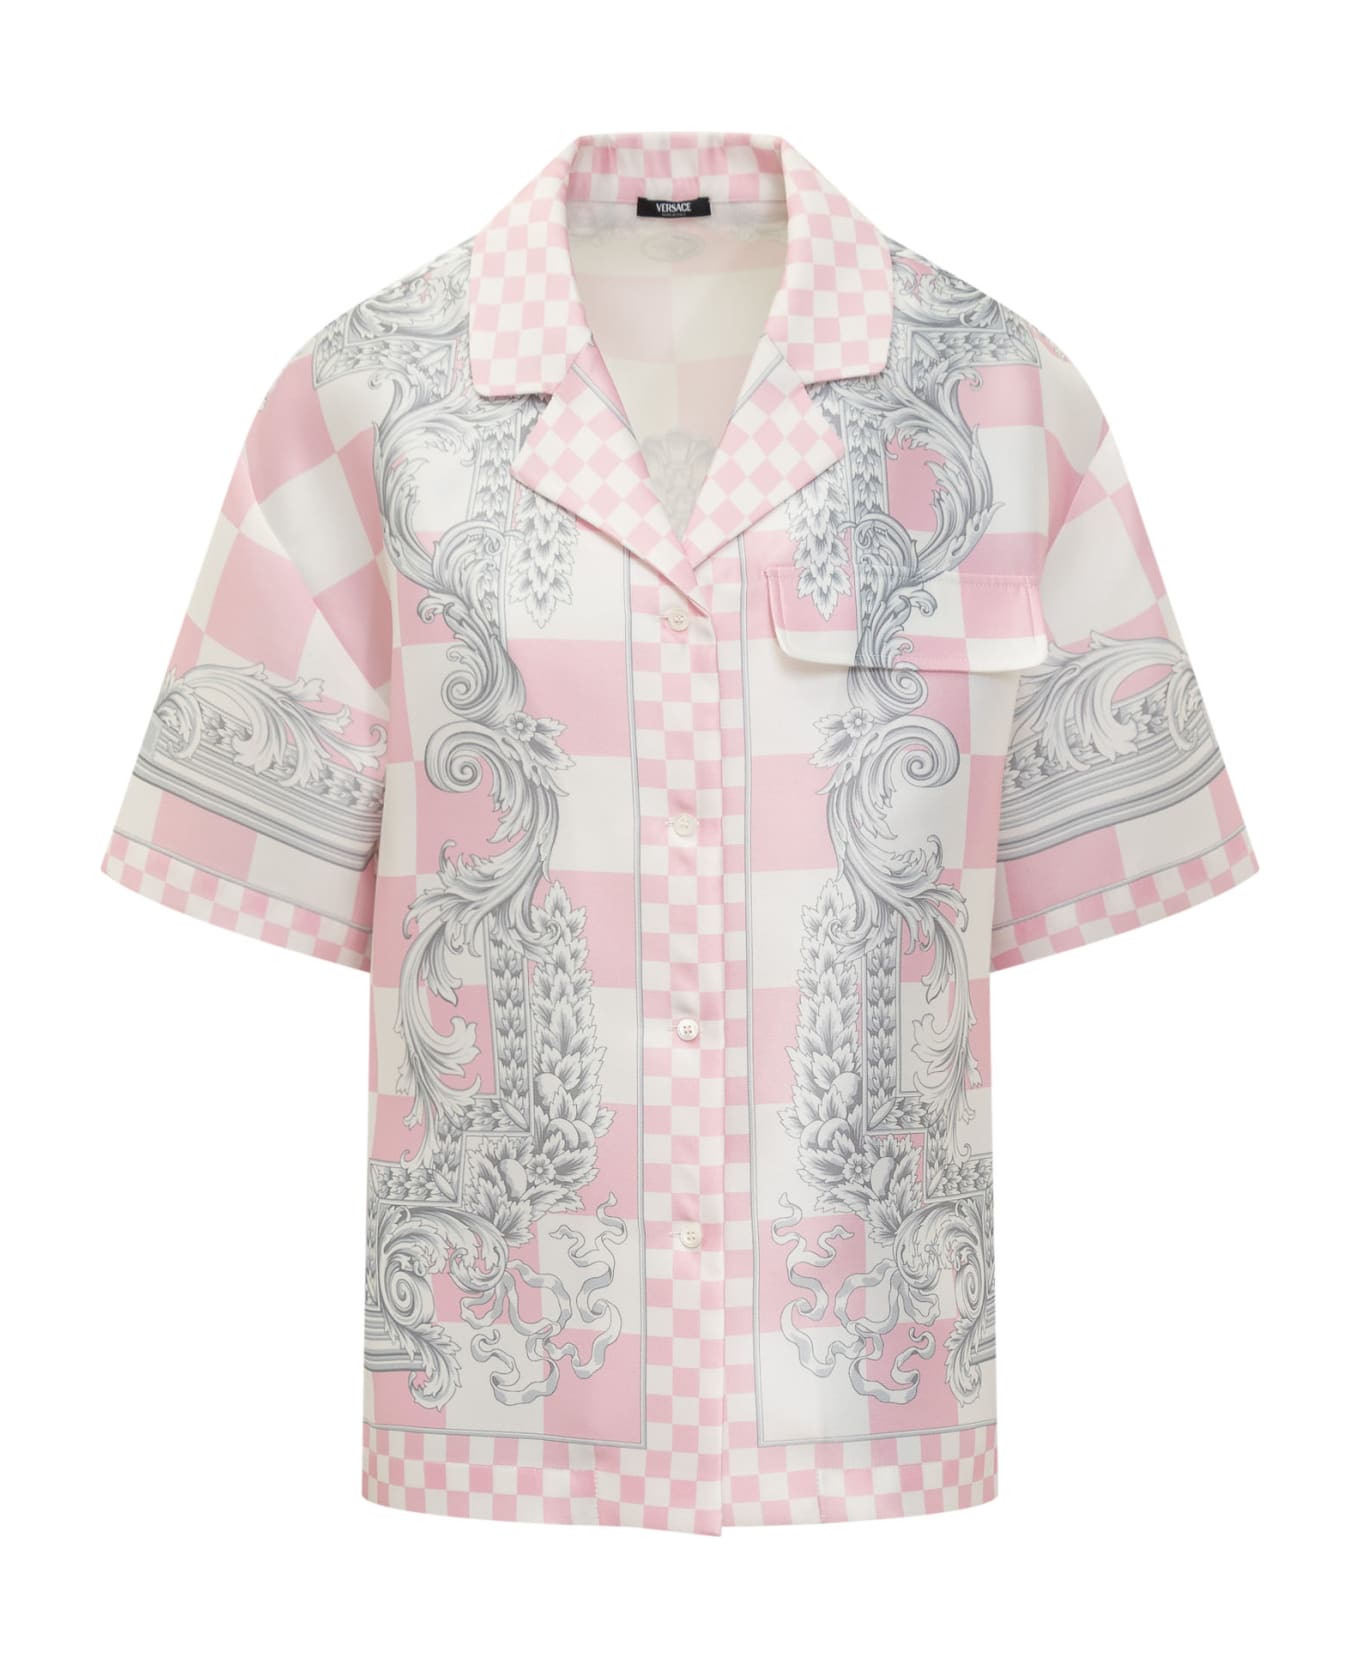 Versace Shirt With Baroque And Medusa Motif - PASTEL PINK-BIANCO-SILVER